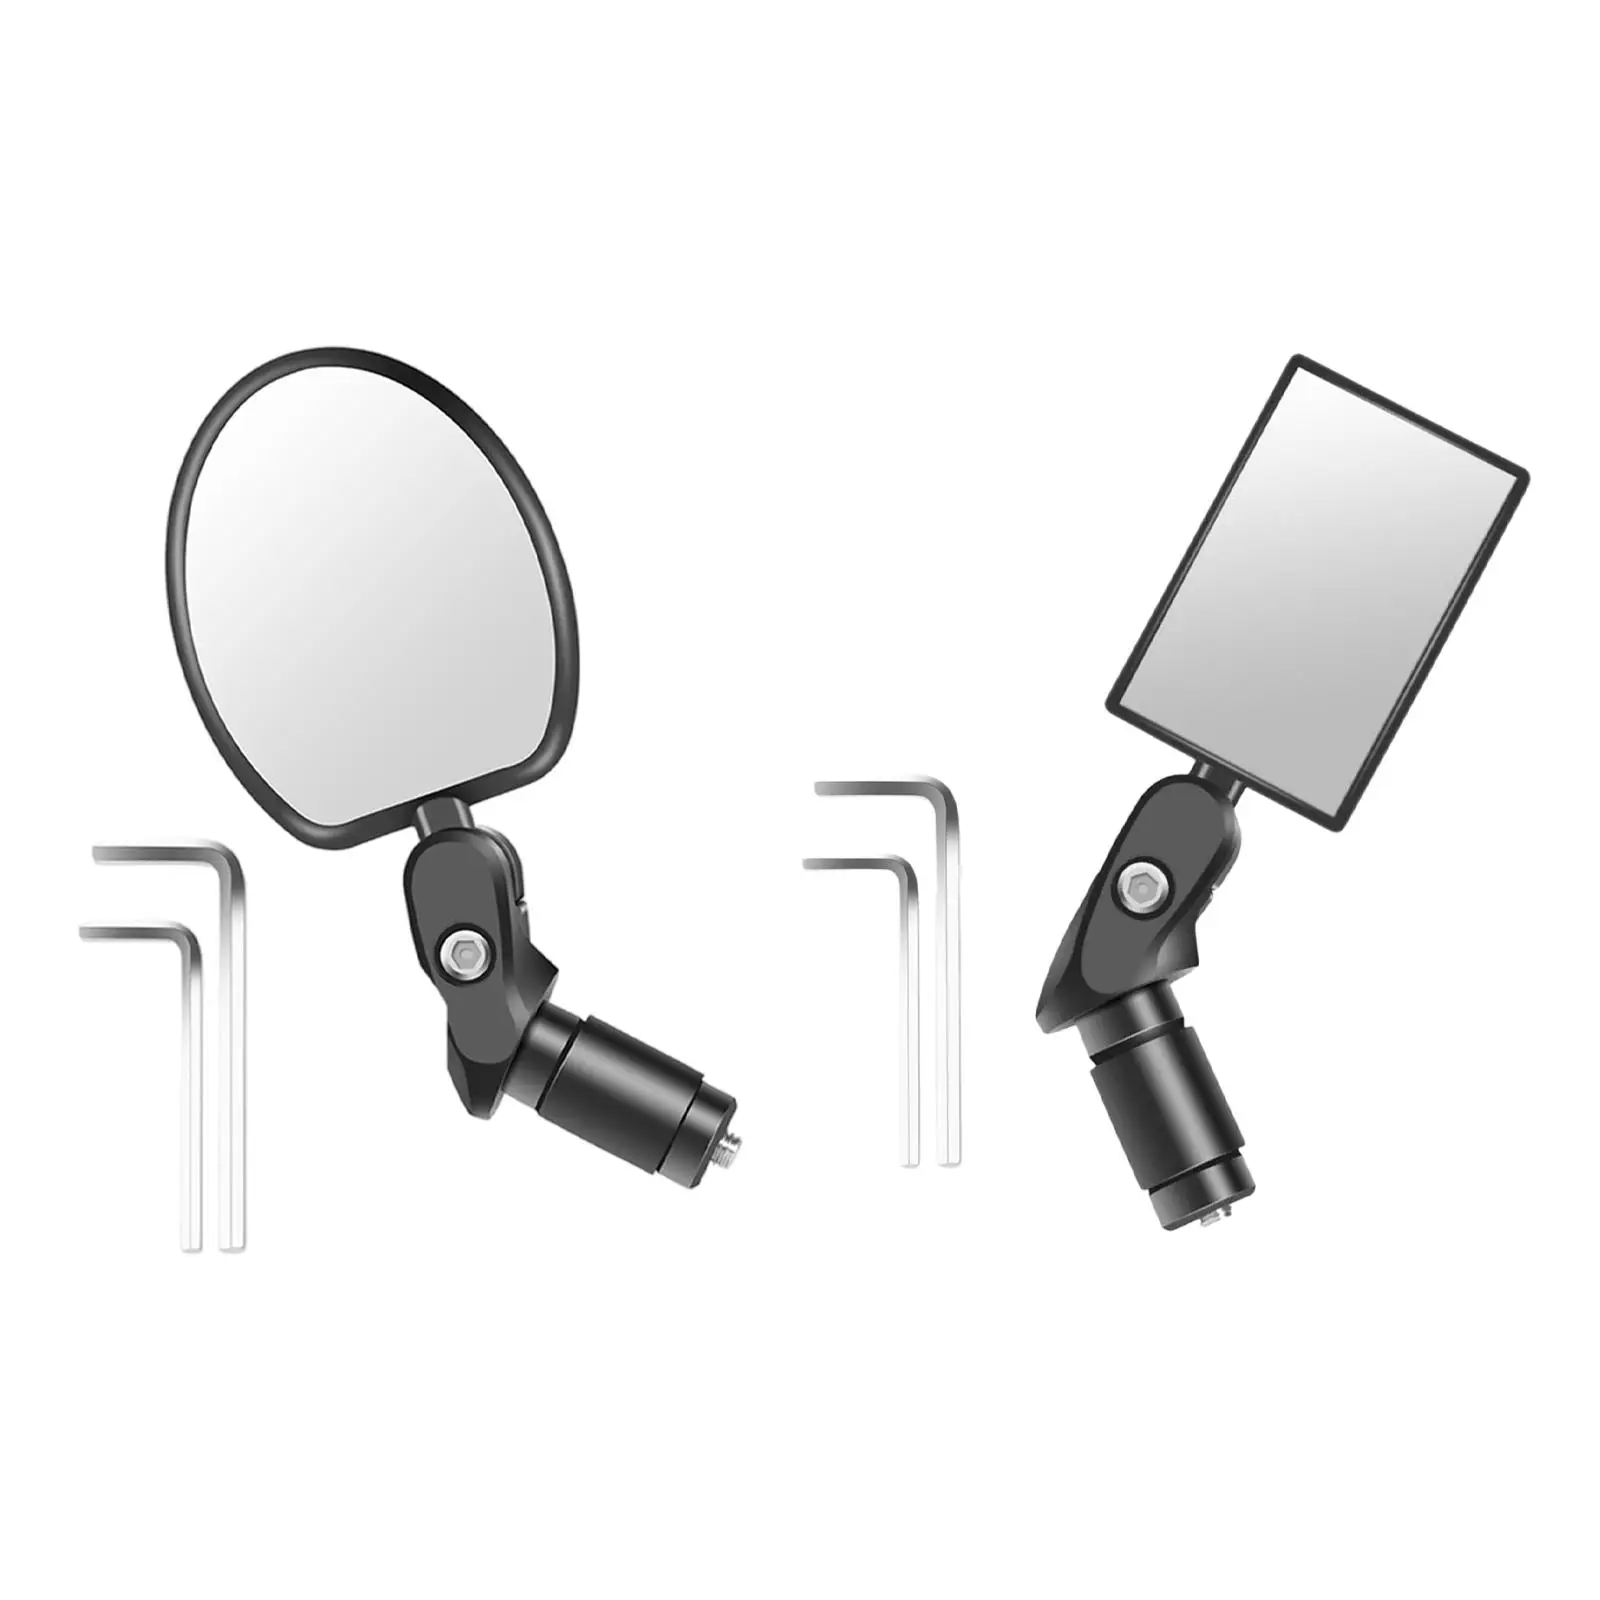 Universal Bicycle Rearview Mirror Wide Range Rear View Safe Mirrors for Road MTB Bike Motorcycle